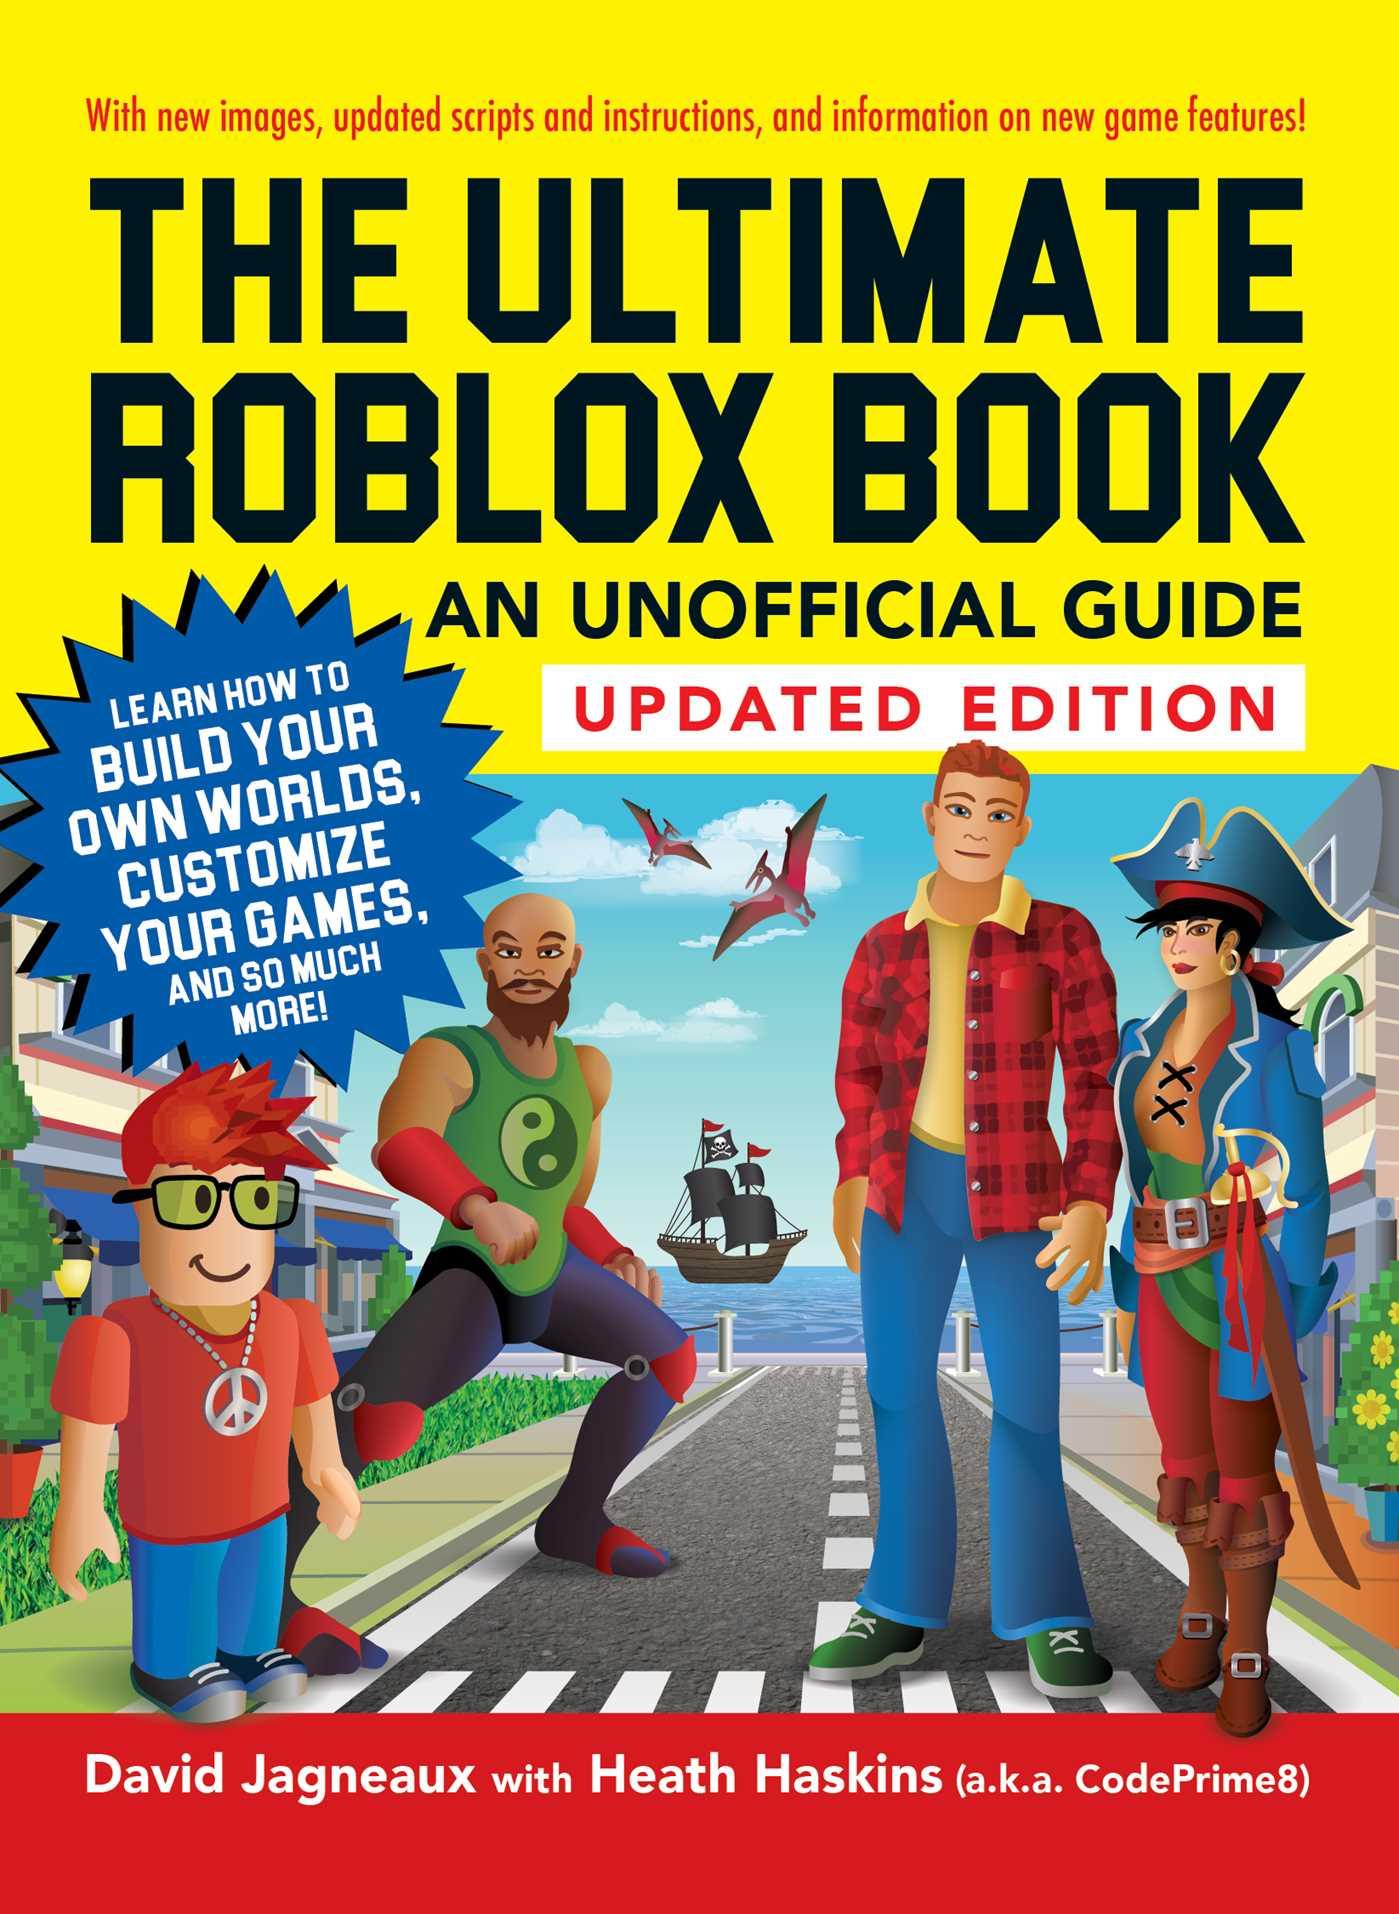 ‎Roblox PS4 Unofficial Game Guide